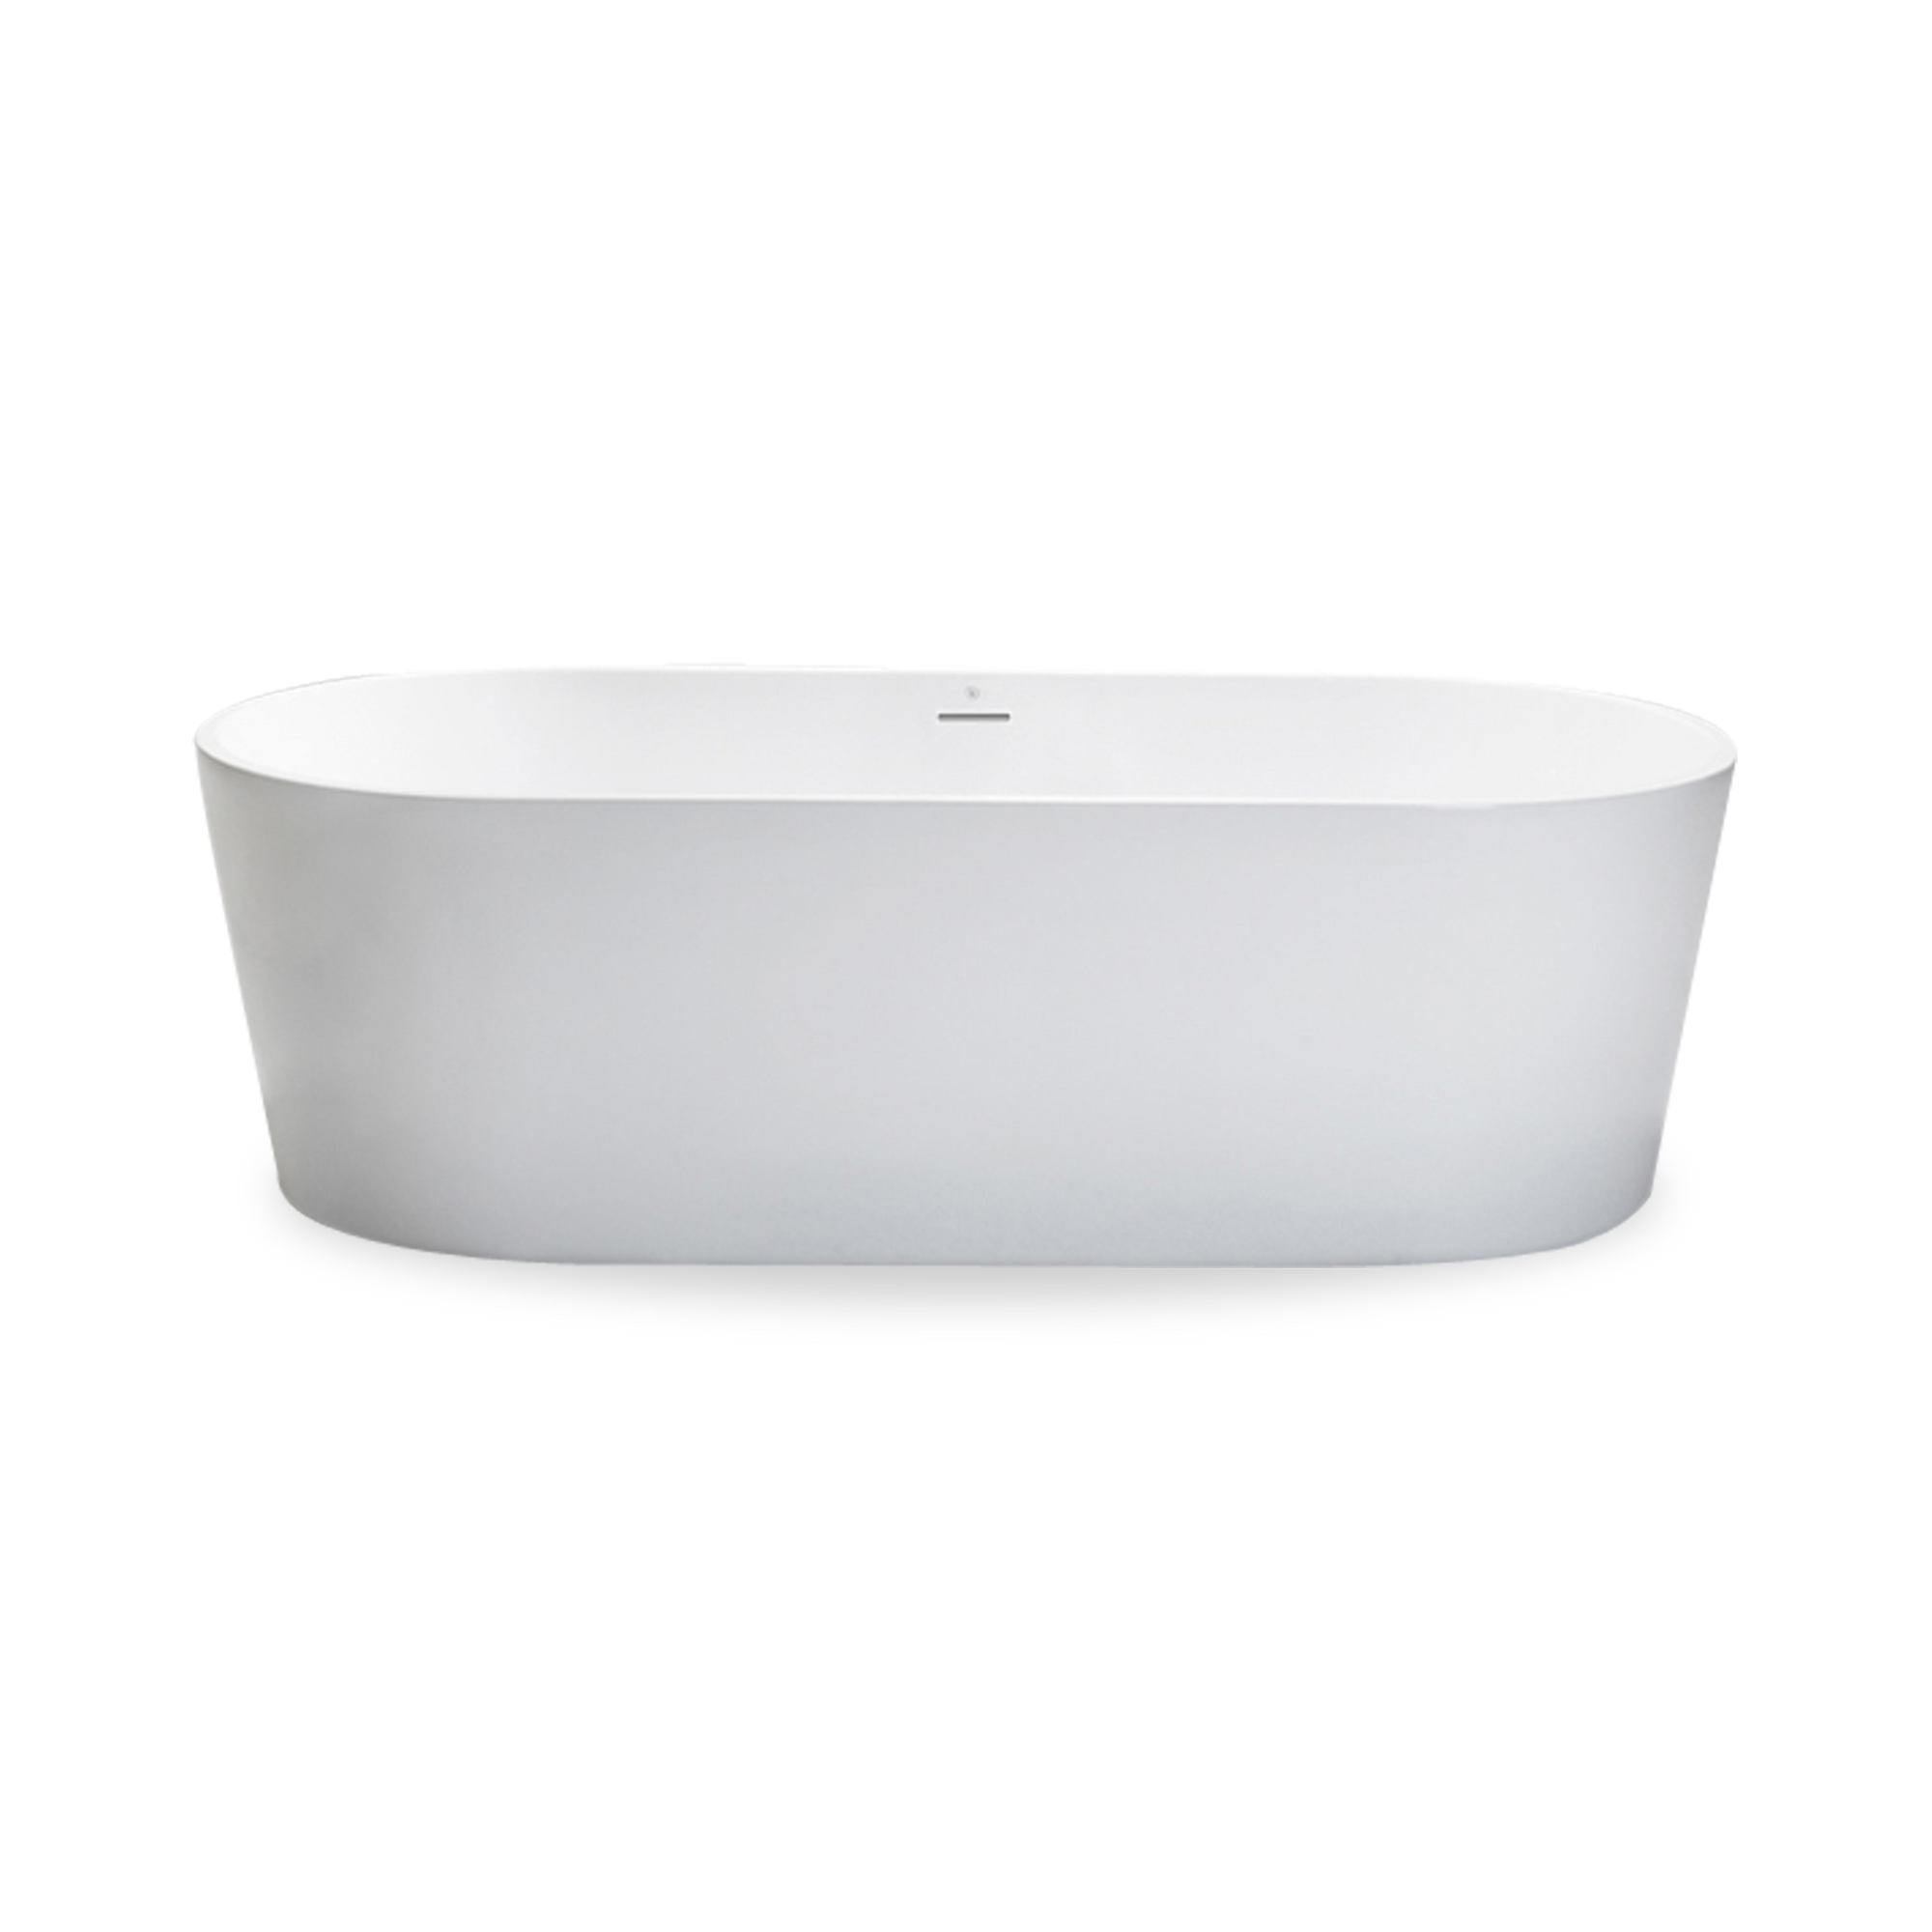 Designed with a sleek, thin profile rim, the classic soft curves of this freestanding acrylic bath lend a sophisticated edge to any modern or transitional bathroom.